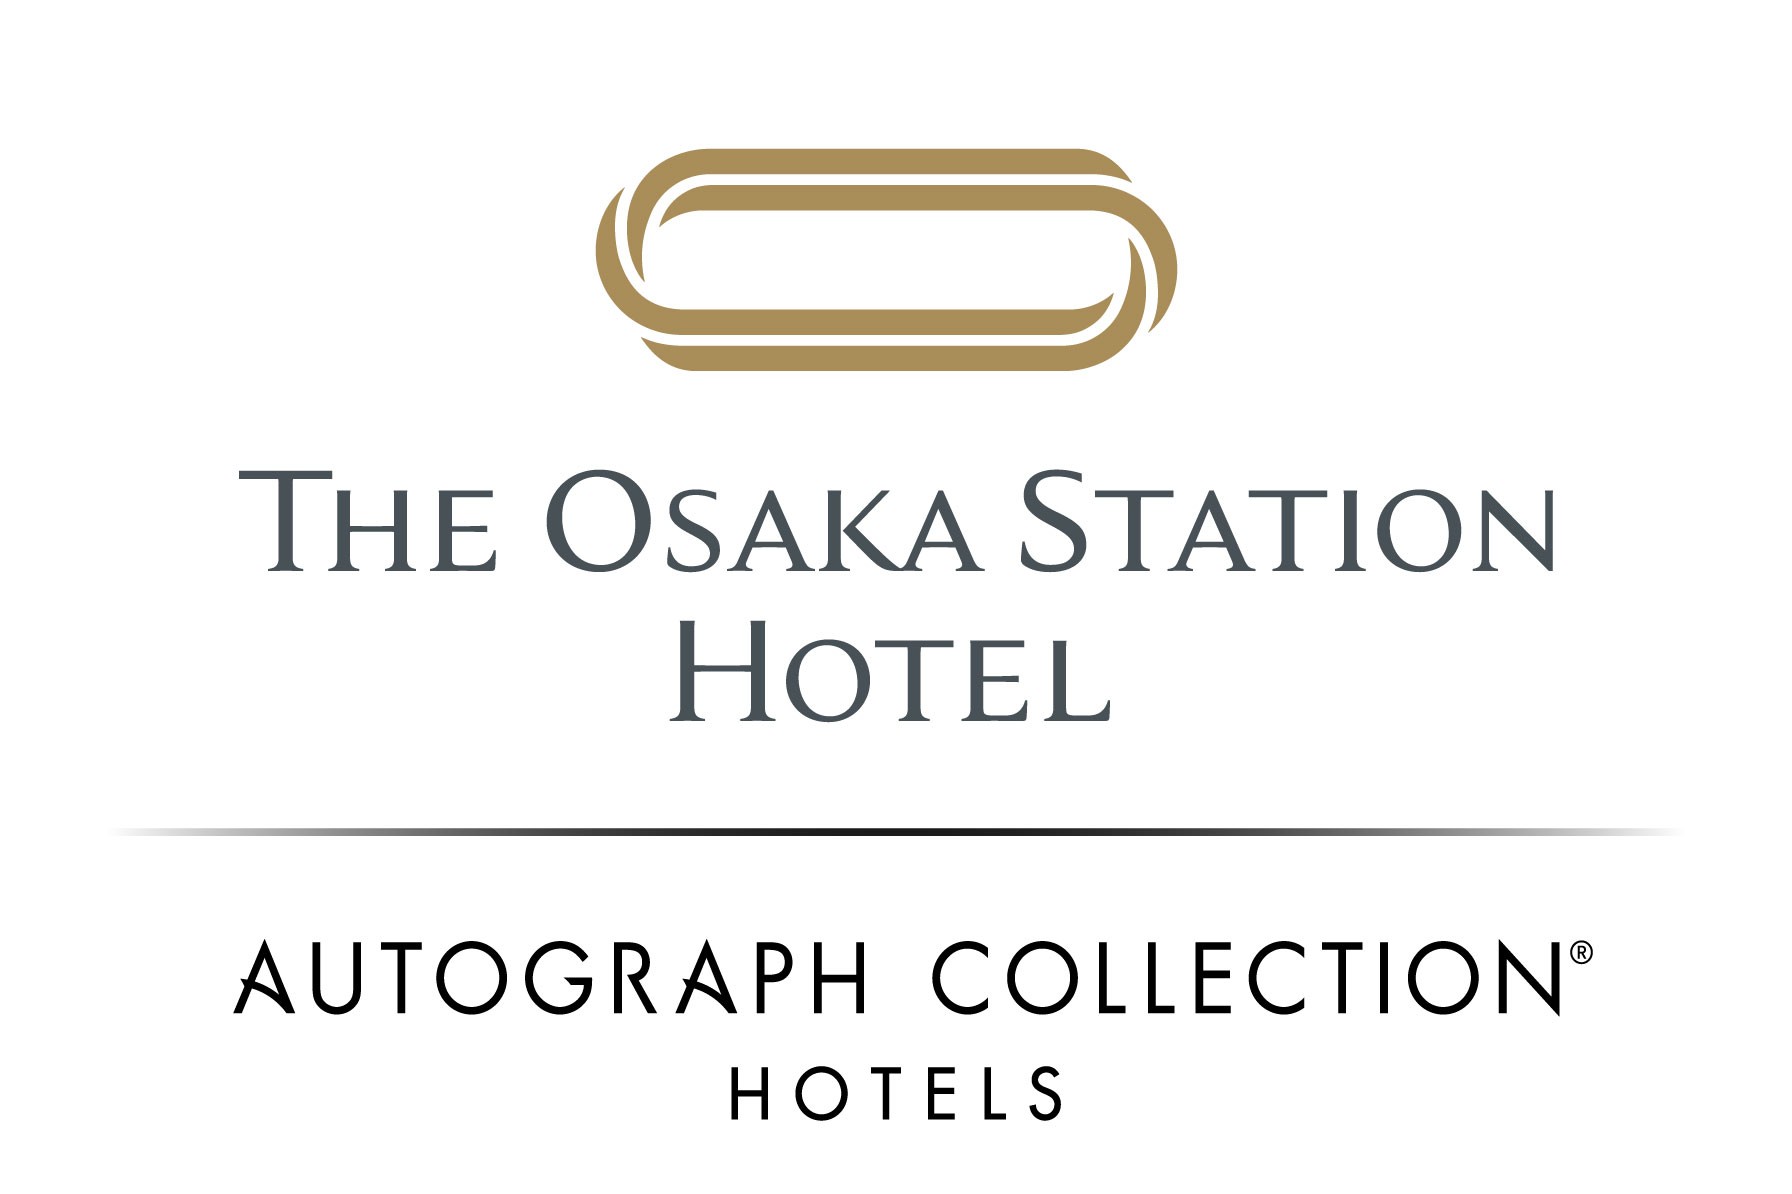 THE OSAKA STATION HOTEL, Autograph Collection expected to open in summer 2024